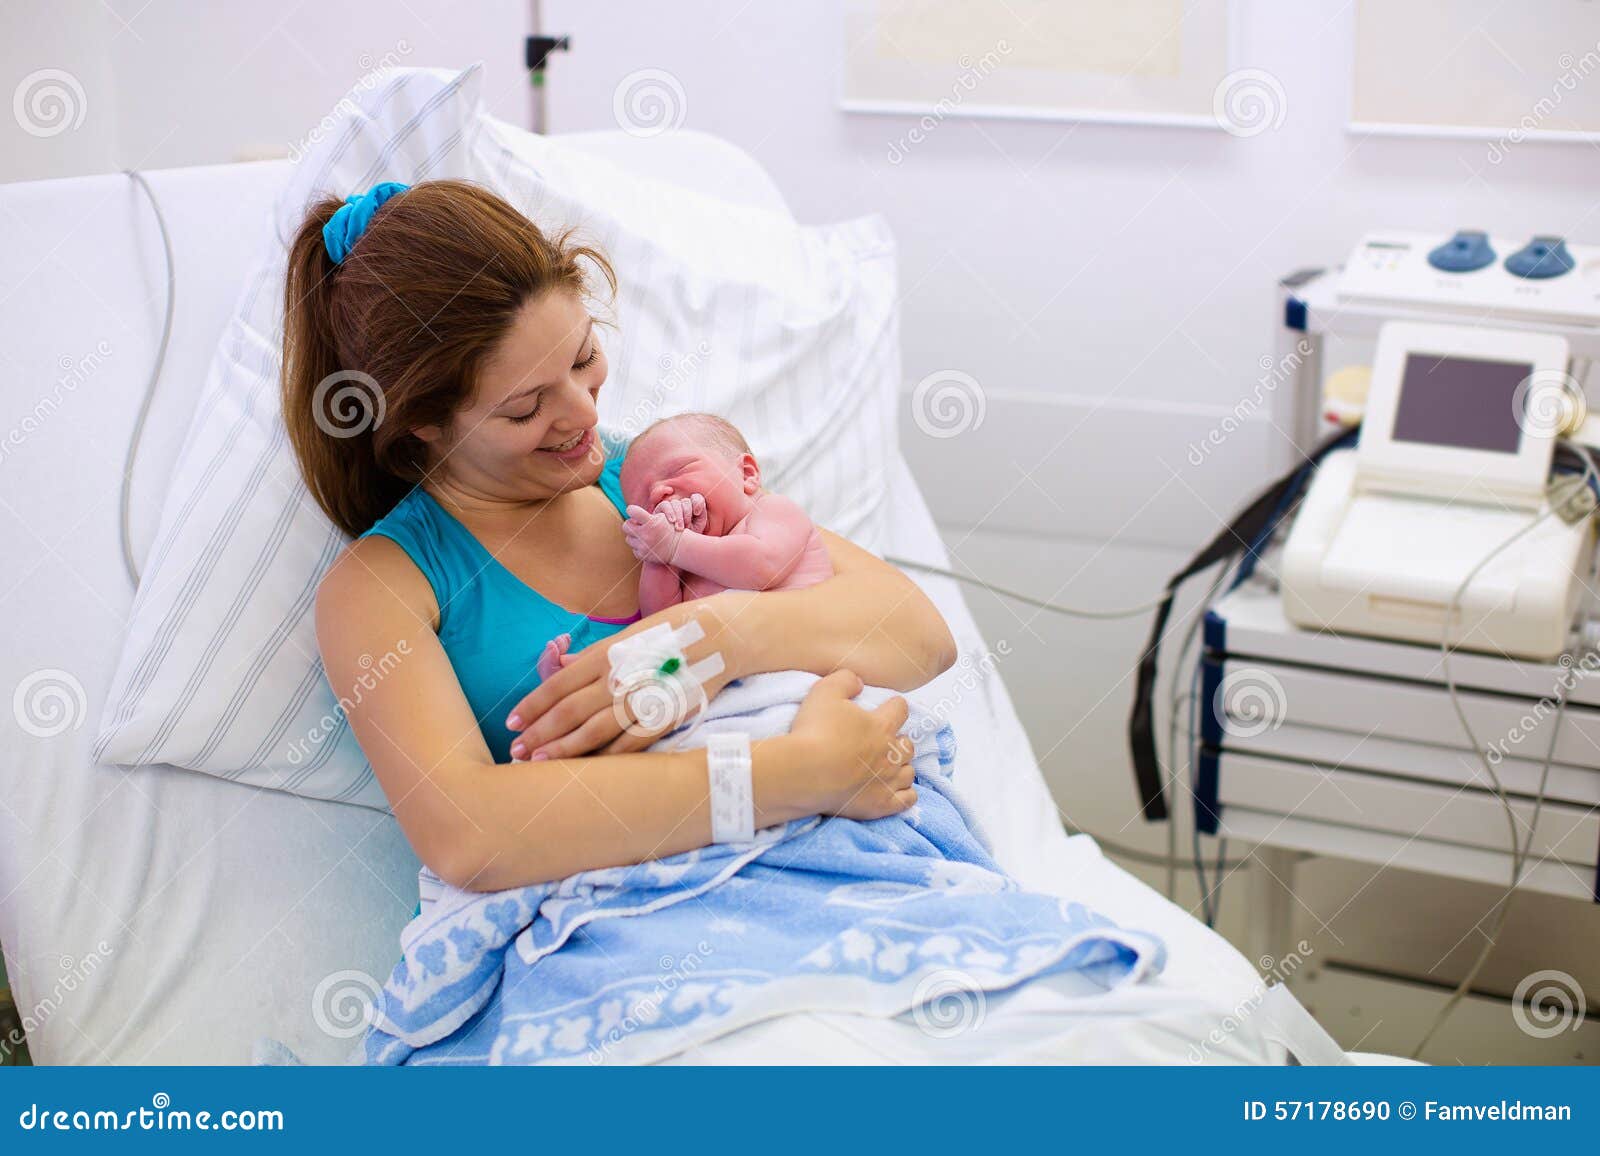 Problems in Obstetric Nurse Care